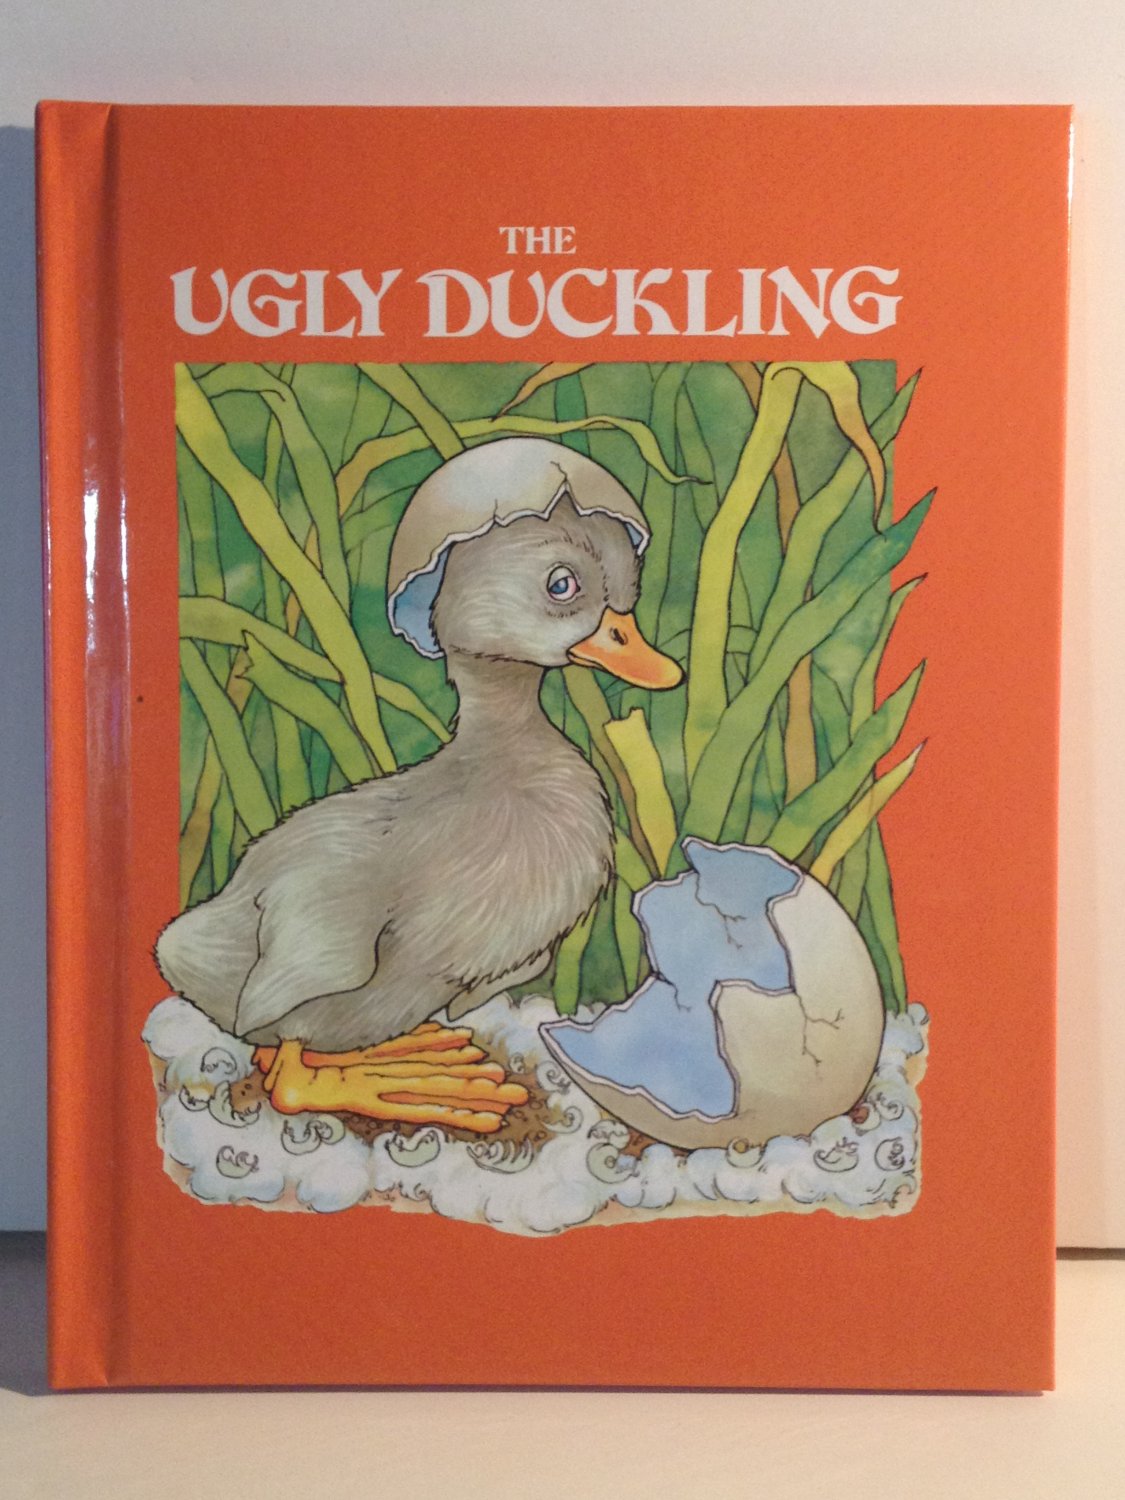 Being a duck. The ugly Duckling Hans Christian Andersen. The ugly Duckling book. Ugly Duckling читать. Ugly Duckling story book.